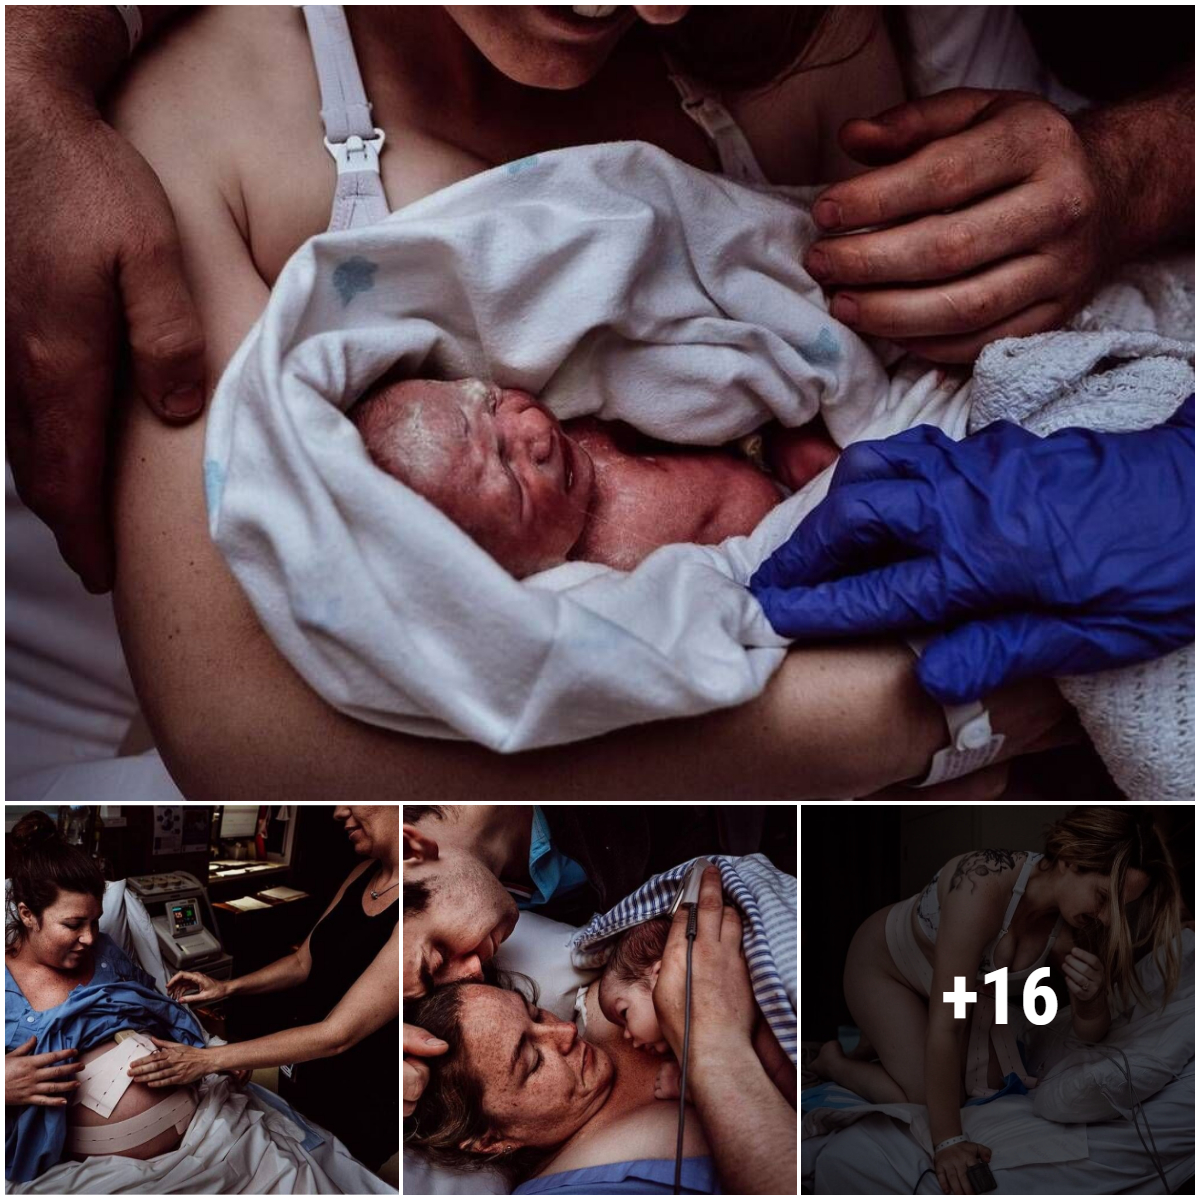 “The Power of Welcoming Life for the First Time: Photos Express the Powerful Emotions of a Woman Welcoming a Baby into Her Life”